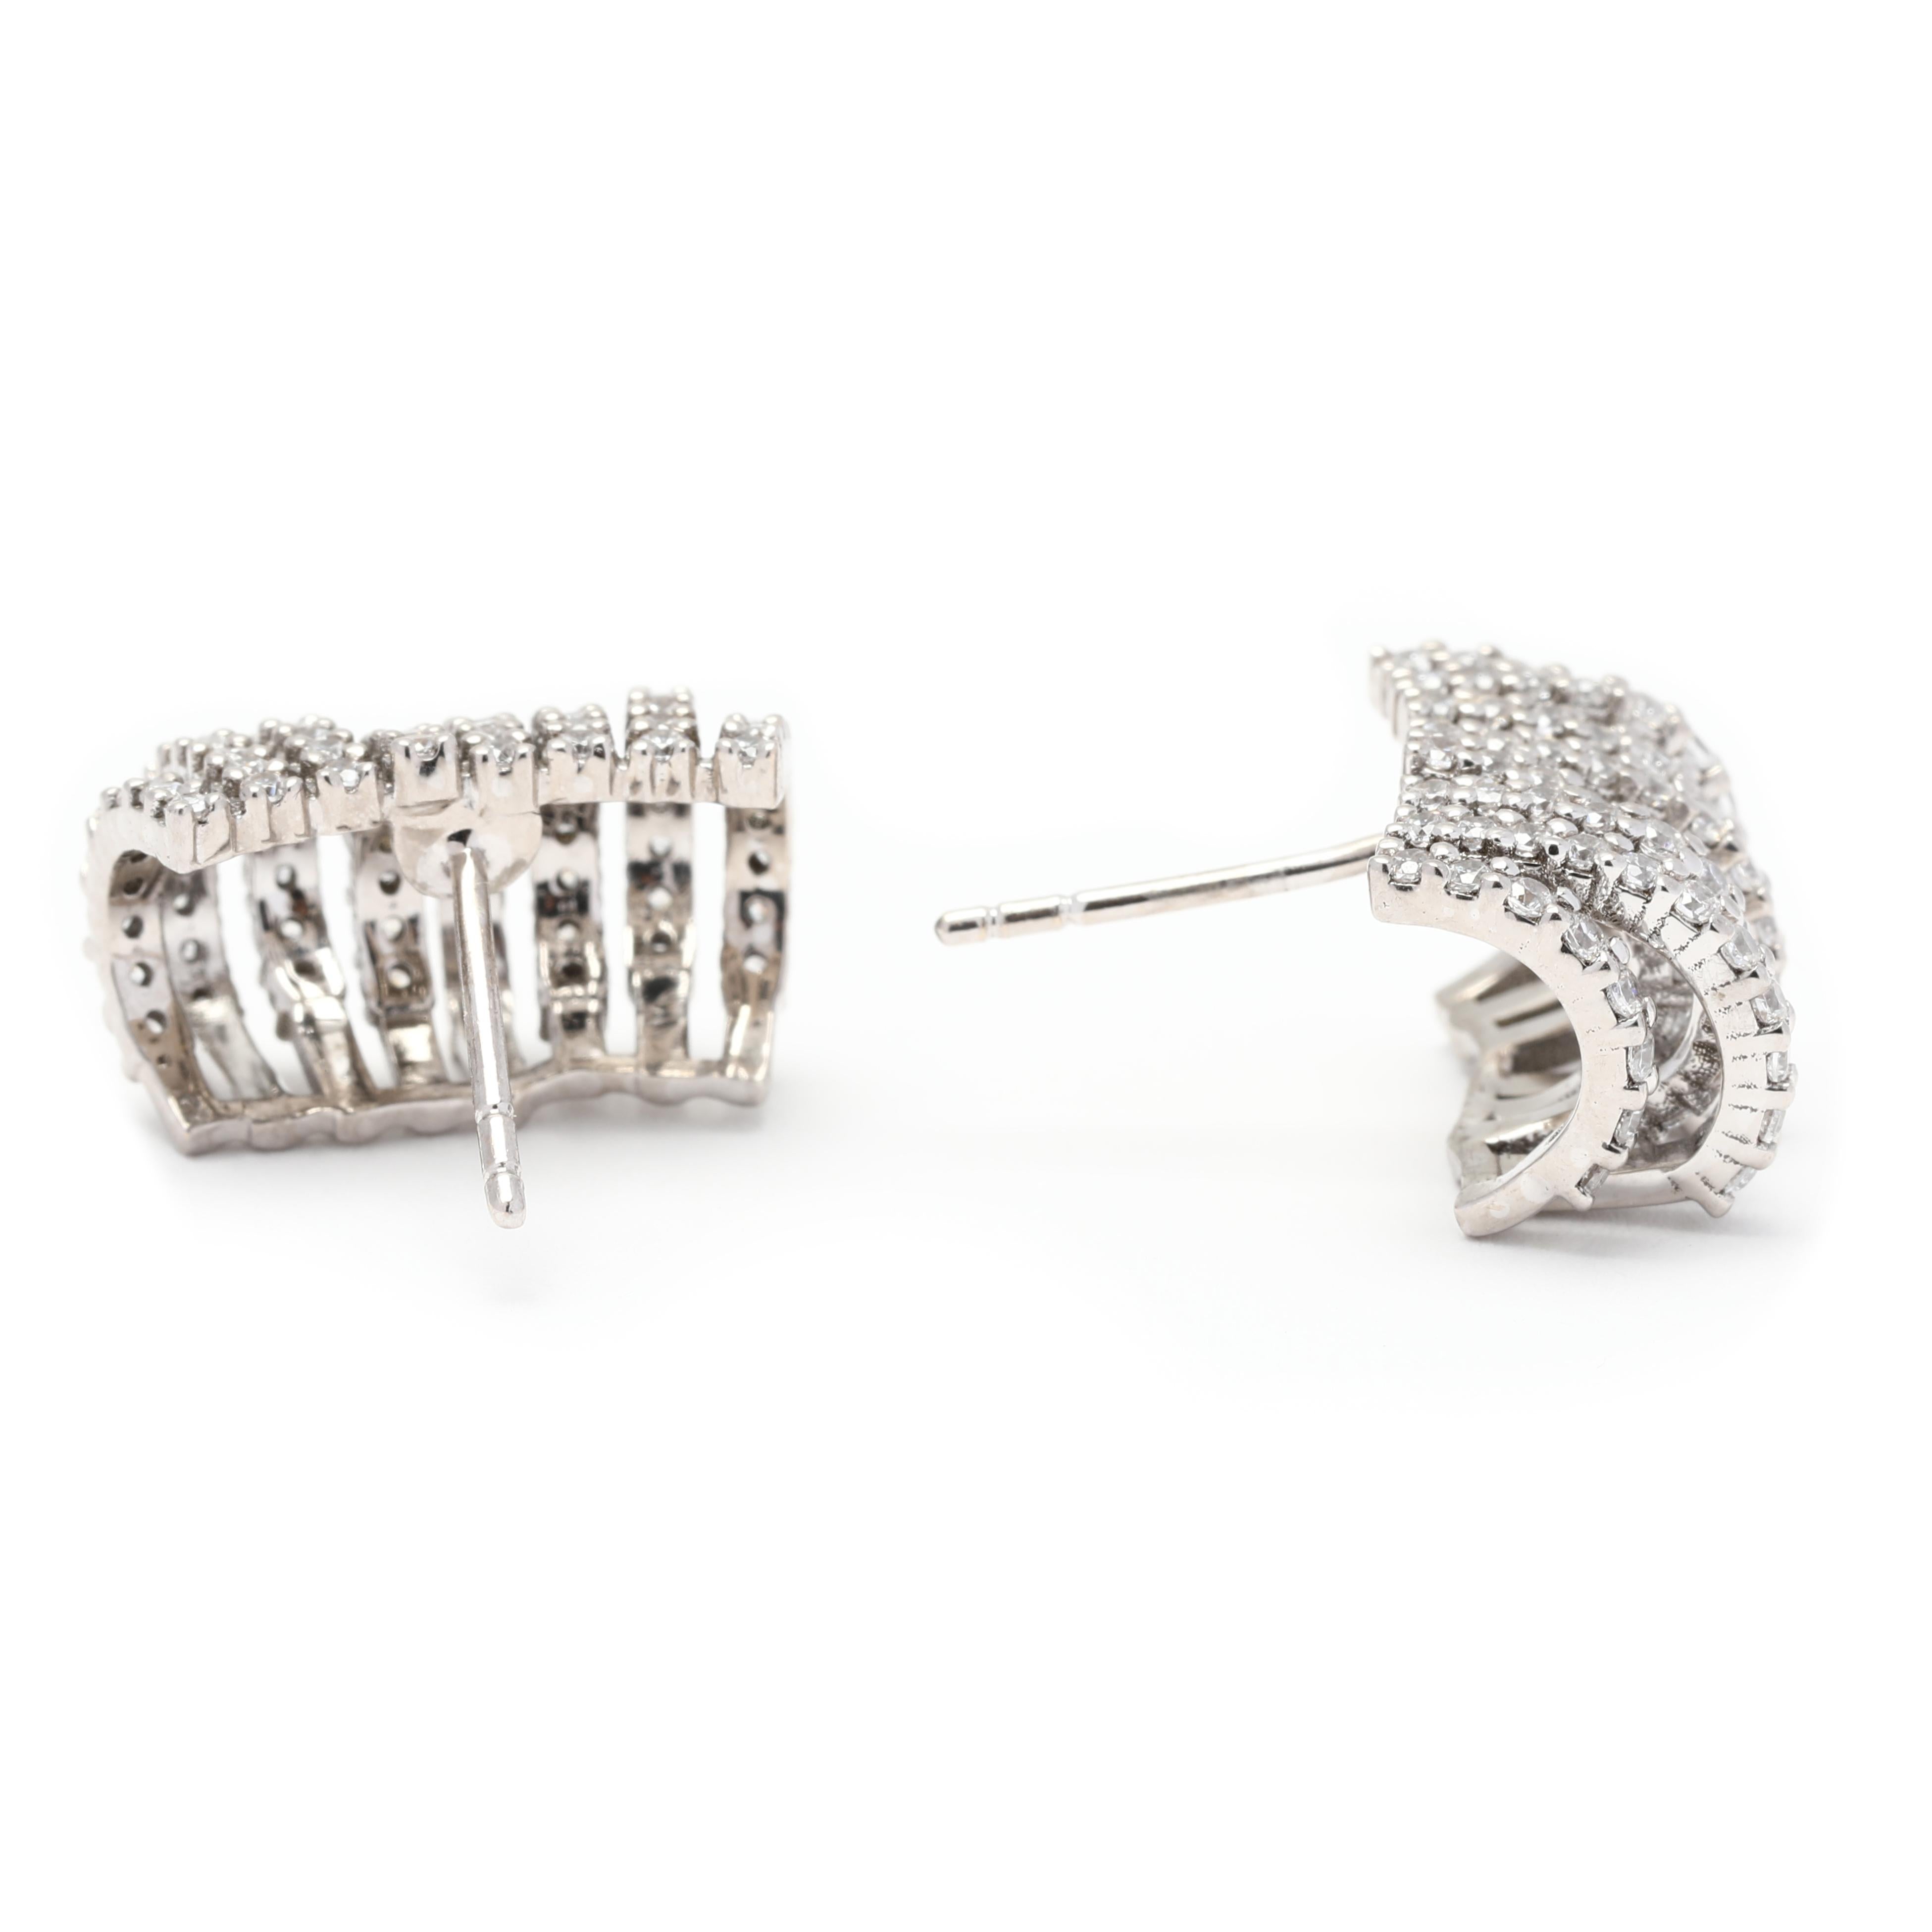 These exquisite Cubic Zirconia Multi Row Huggie Hoop Earrings are the perfect accessory for adding a touch of sparkle and glamour to any outfit. Made from 14K white gold, these earrings feature multiple rows of small cubic zirconia stones, creating